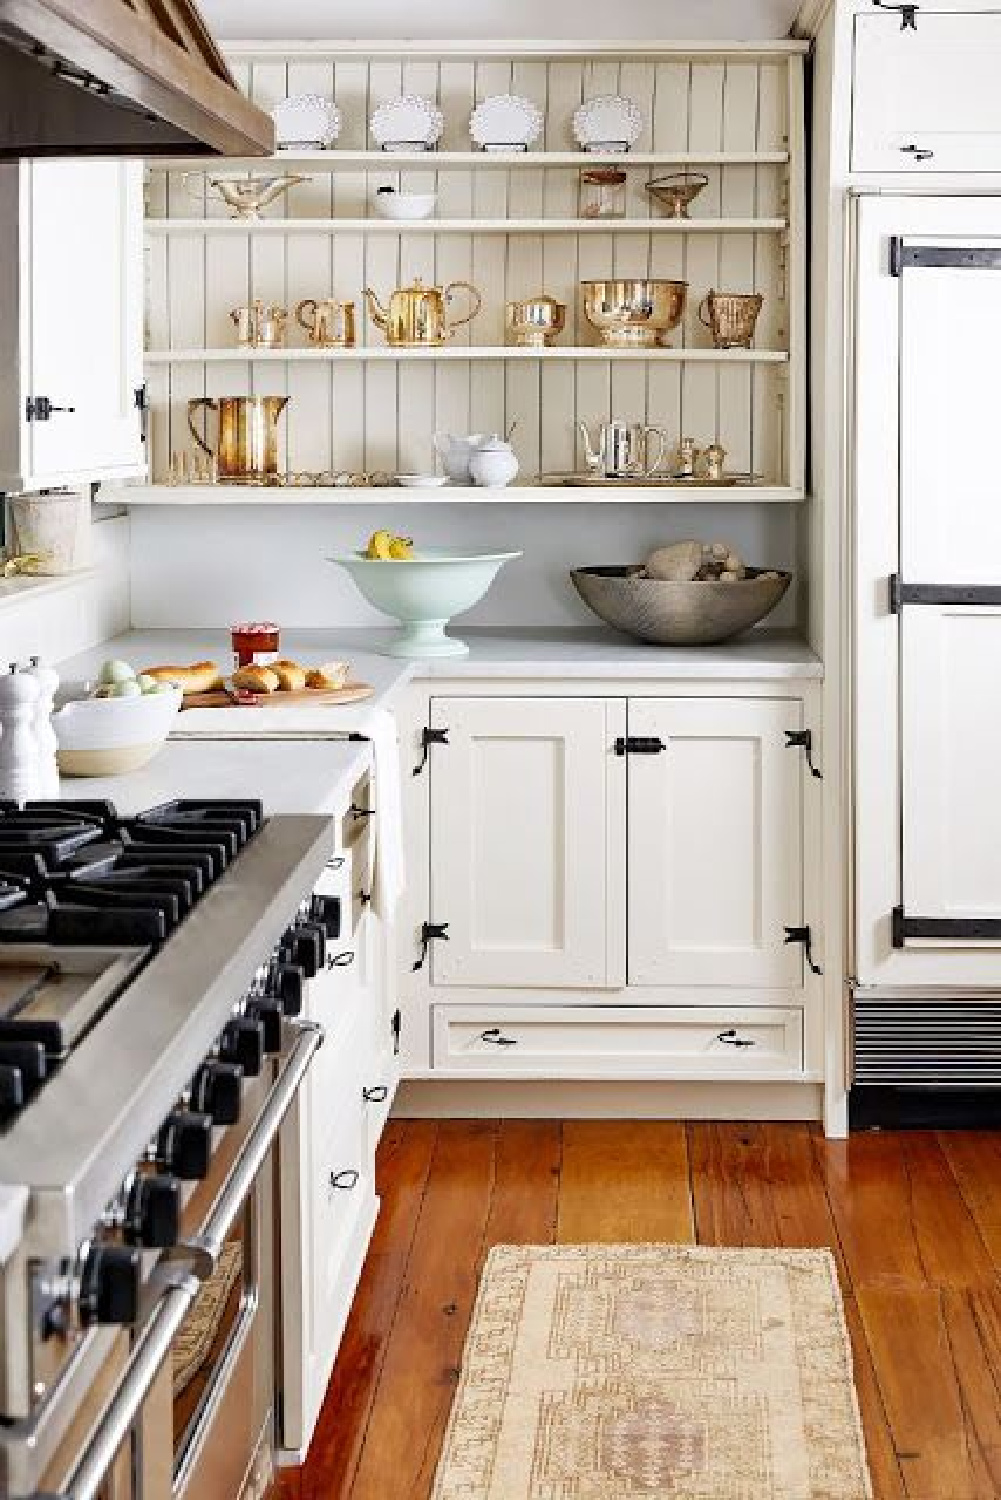 Gorgeous open shelving with white beadboard and collected English silver and lacework china in this modern farmhouse kitchen. Designer Nicole Fisher created this "residential retail" show house and family home for One King Lane president Debbie Propst. #farmhousekitchen #whitecabinets #beadboard #openshelves